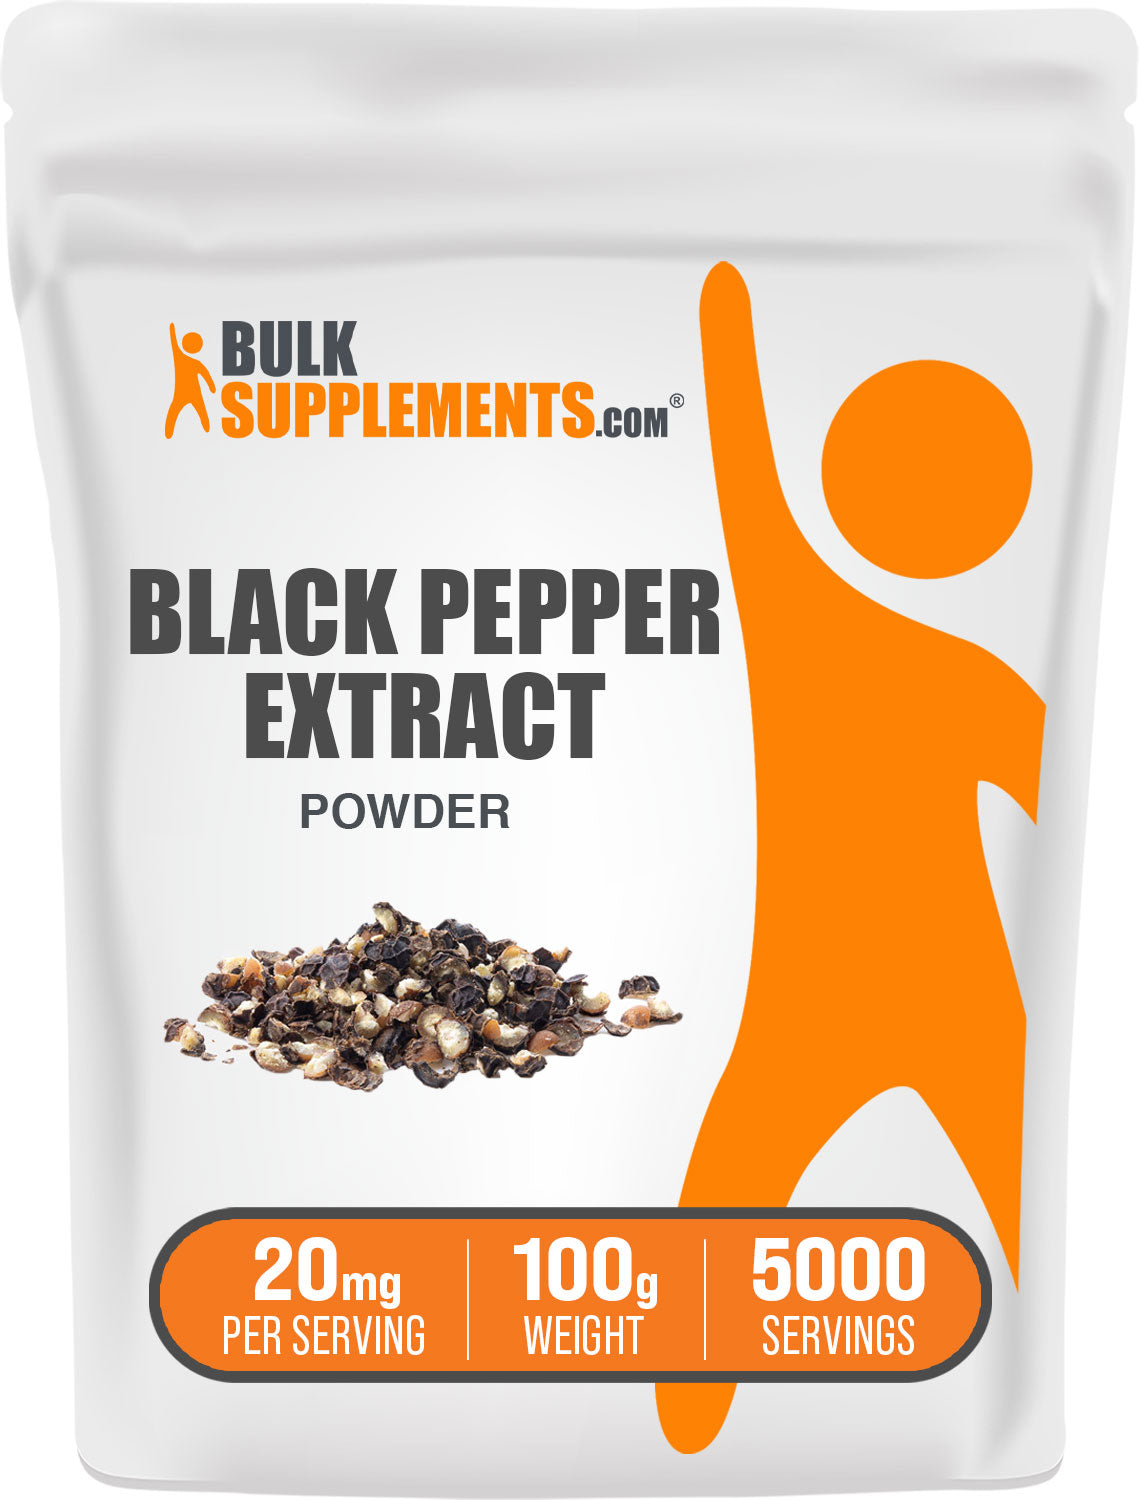 100g bag of black pepper extract